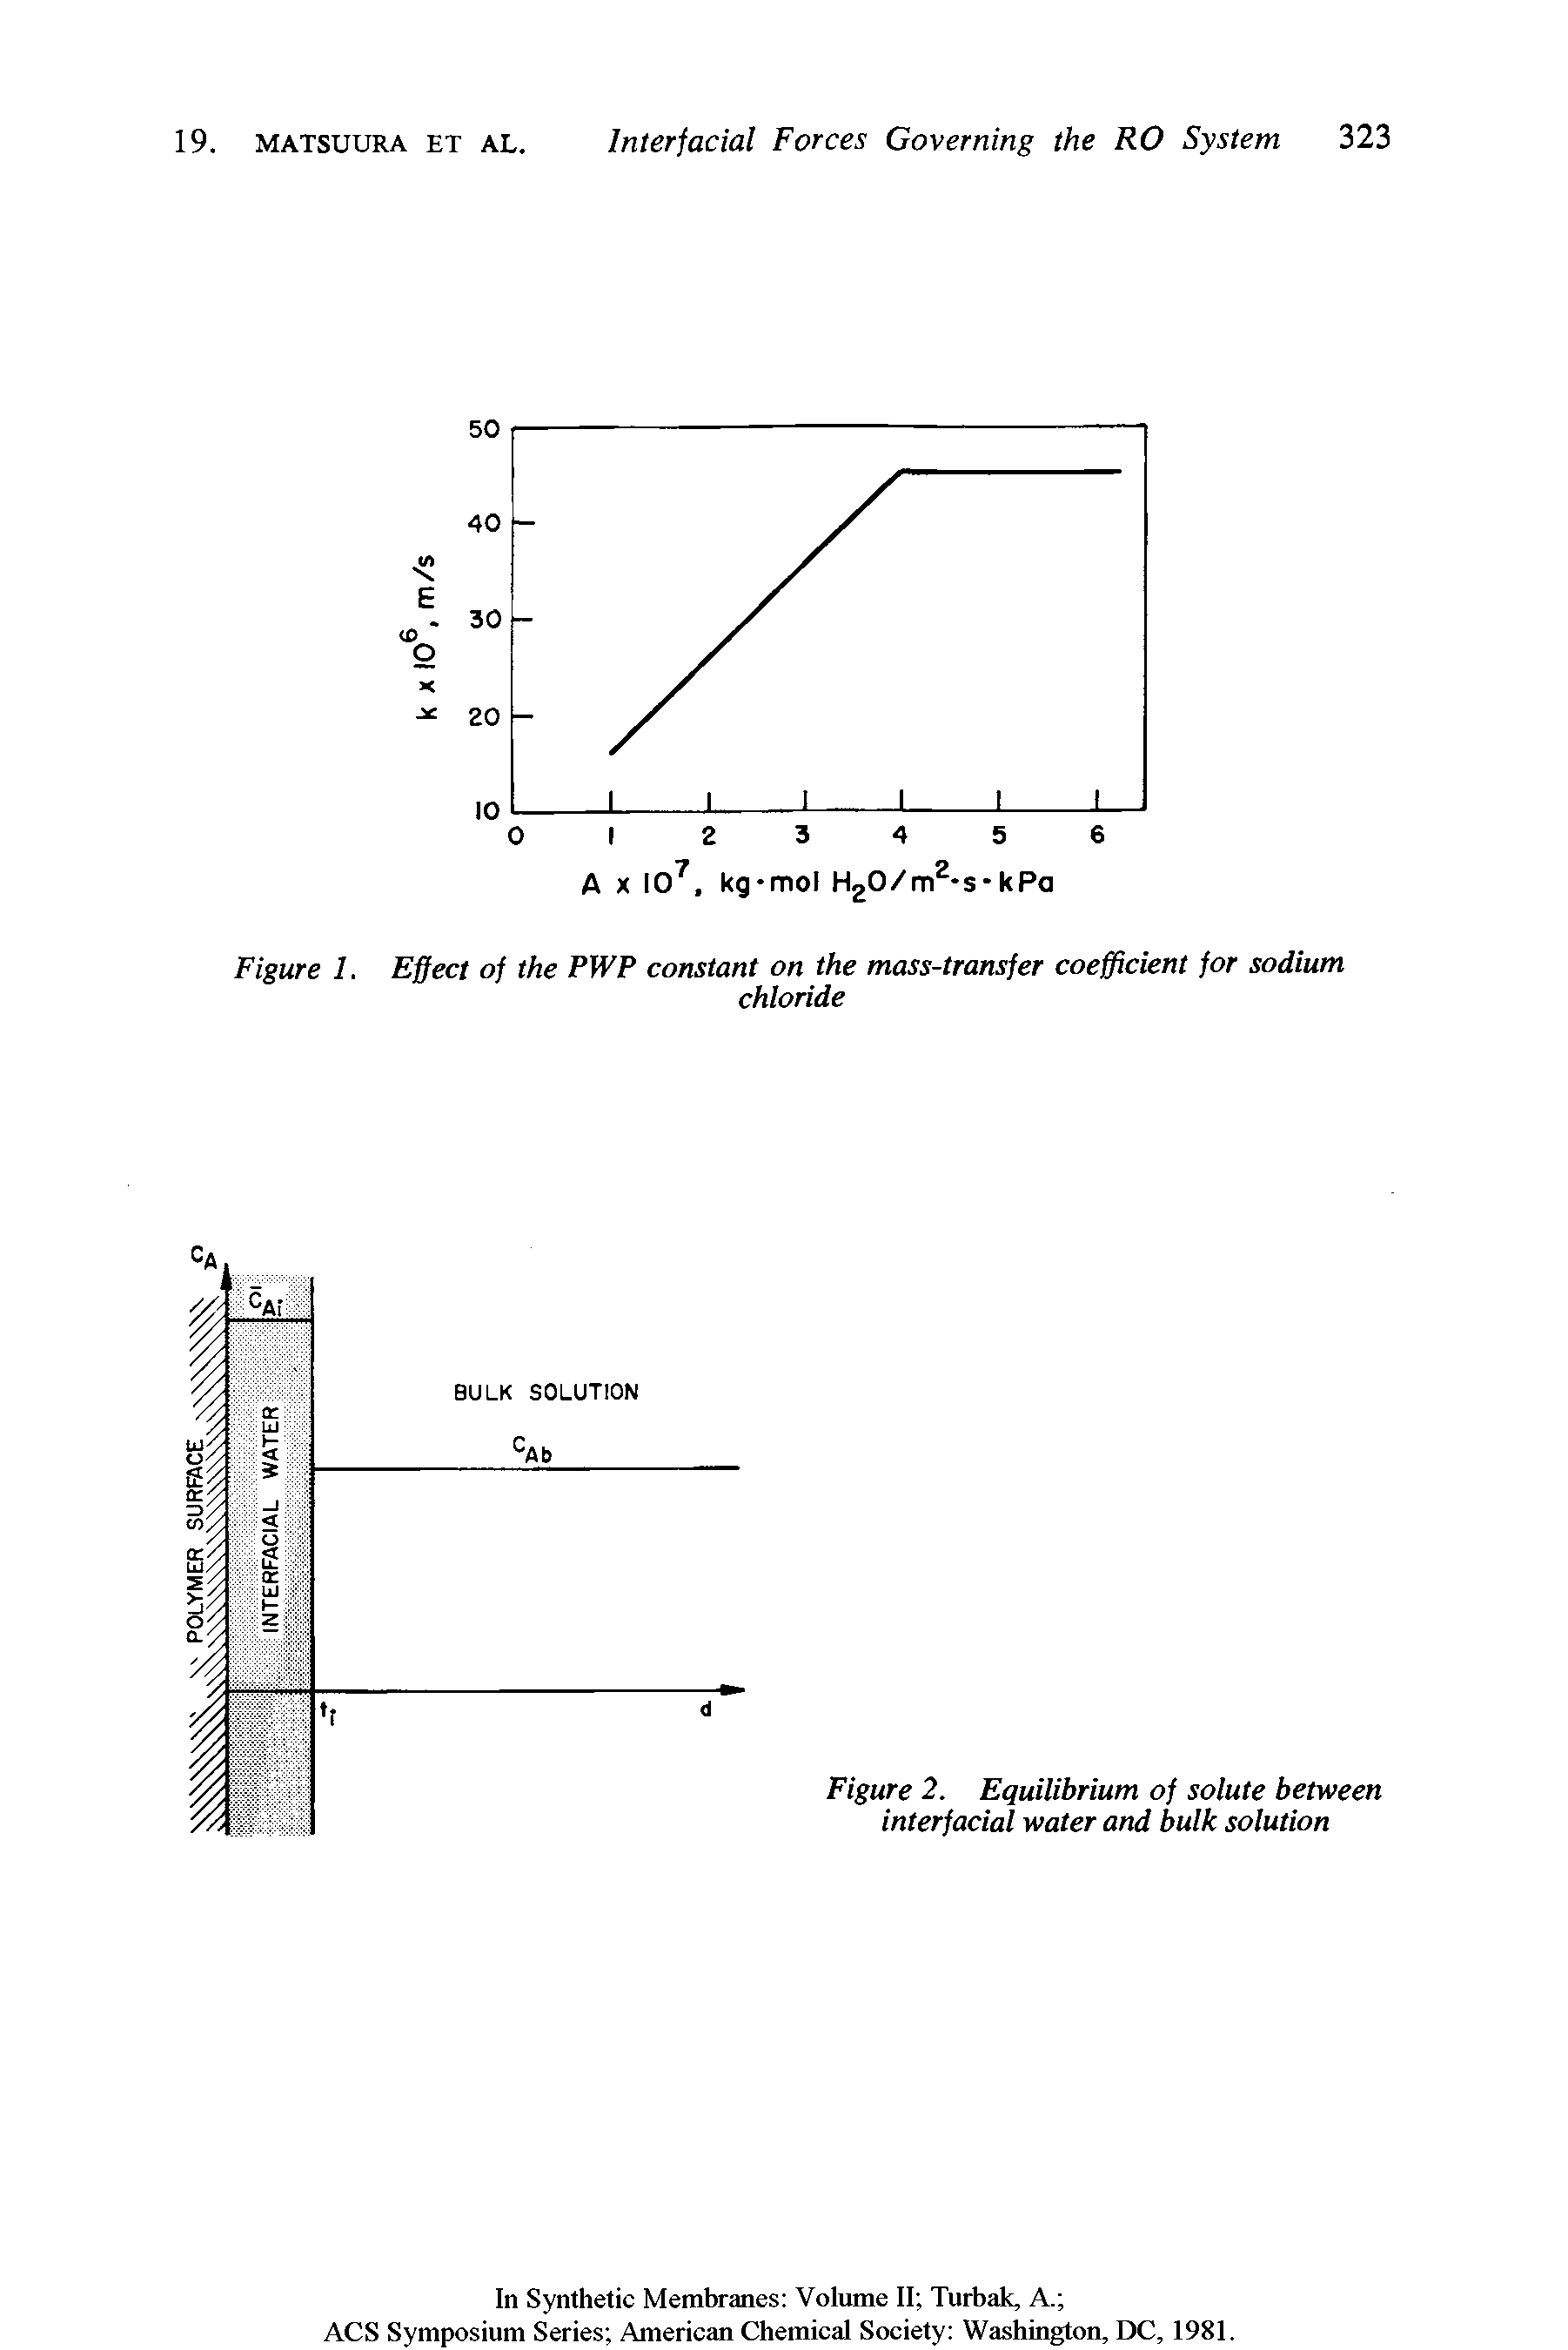 Figure 2. Equilibrium of solute between interfacial water and bulk solution...